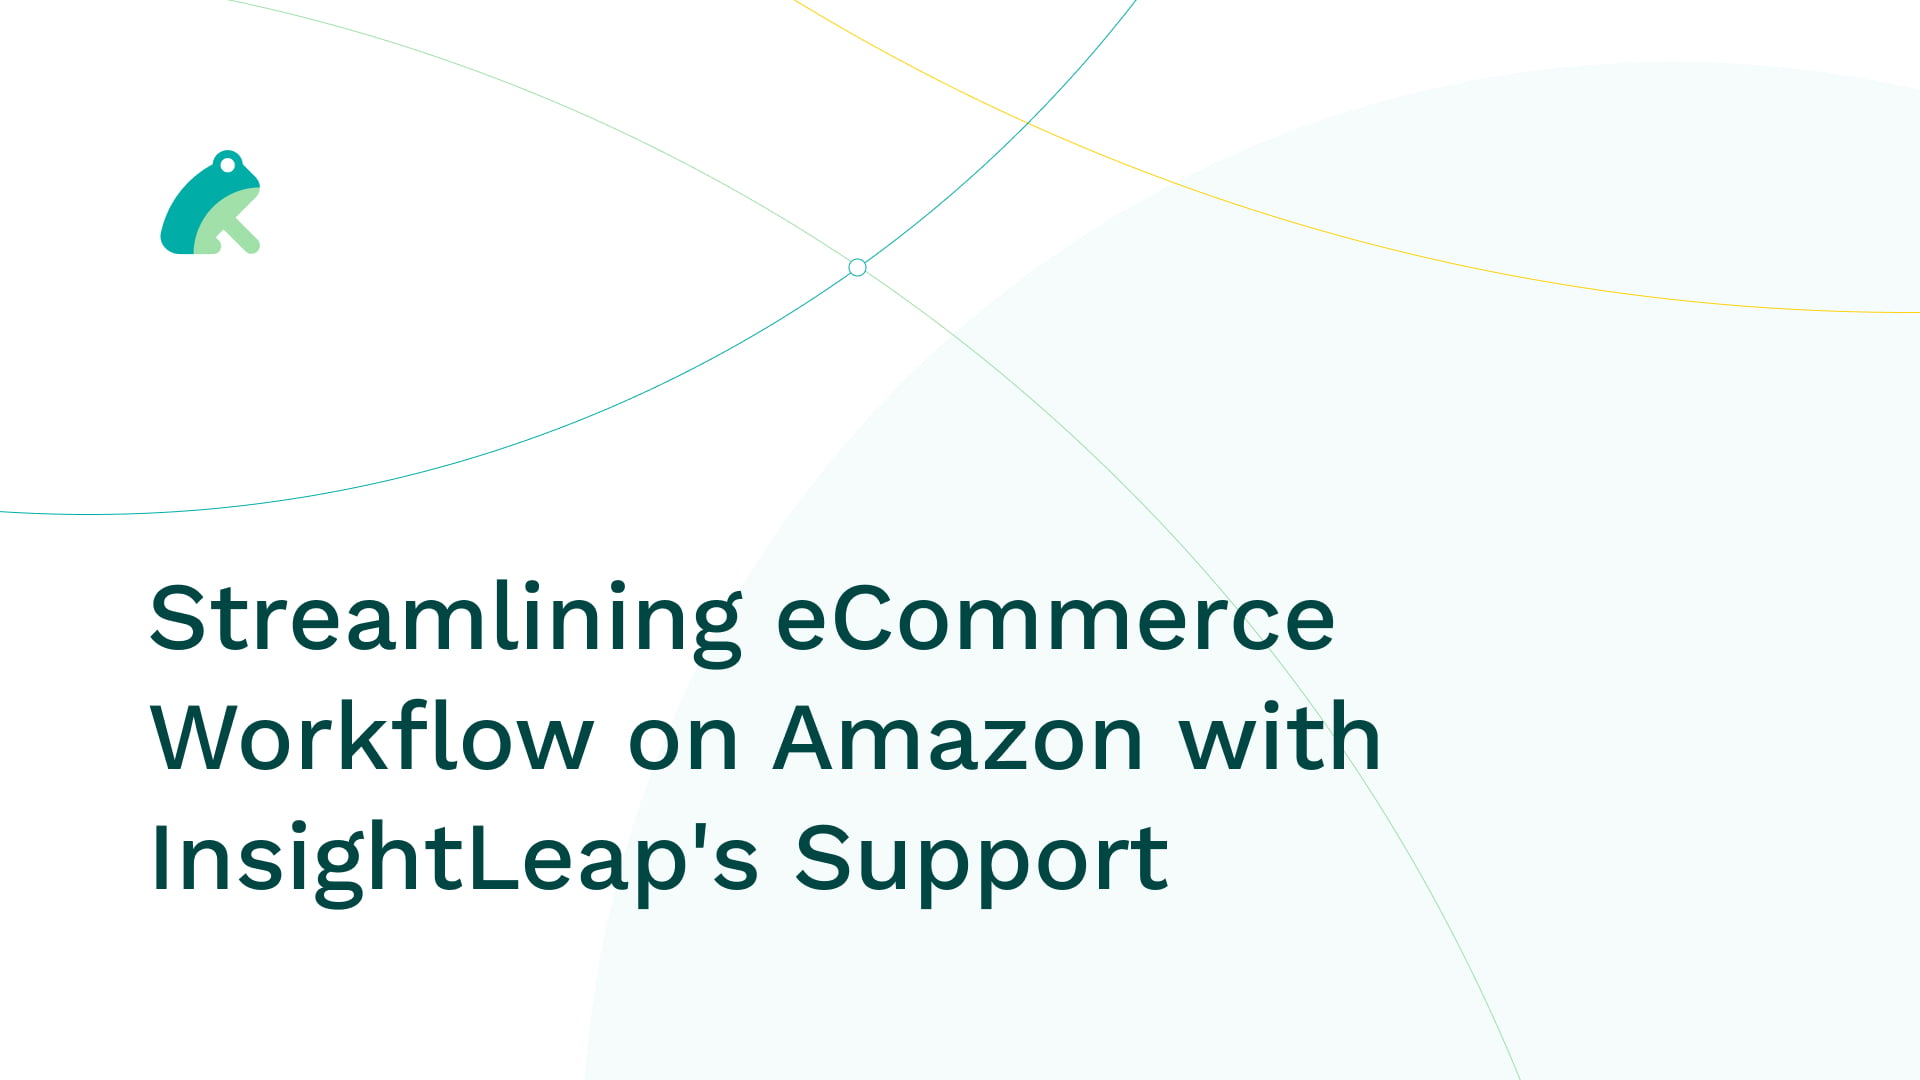 Streamlining eCommerce Workflow on Amazon with InsightLeap's Support